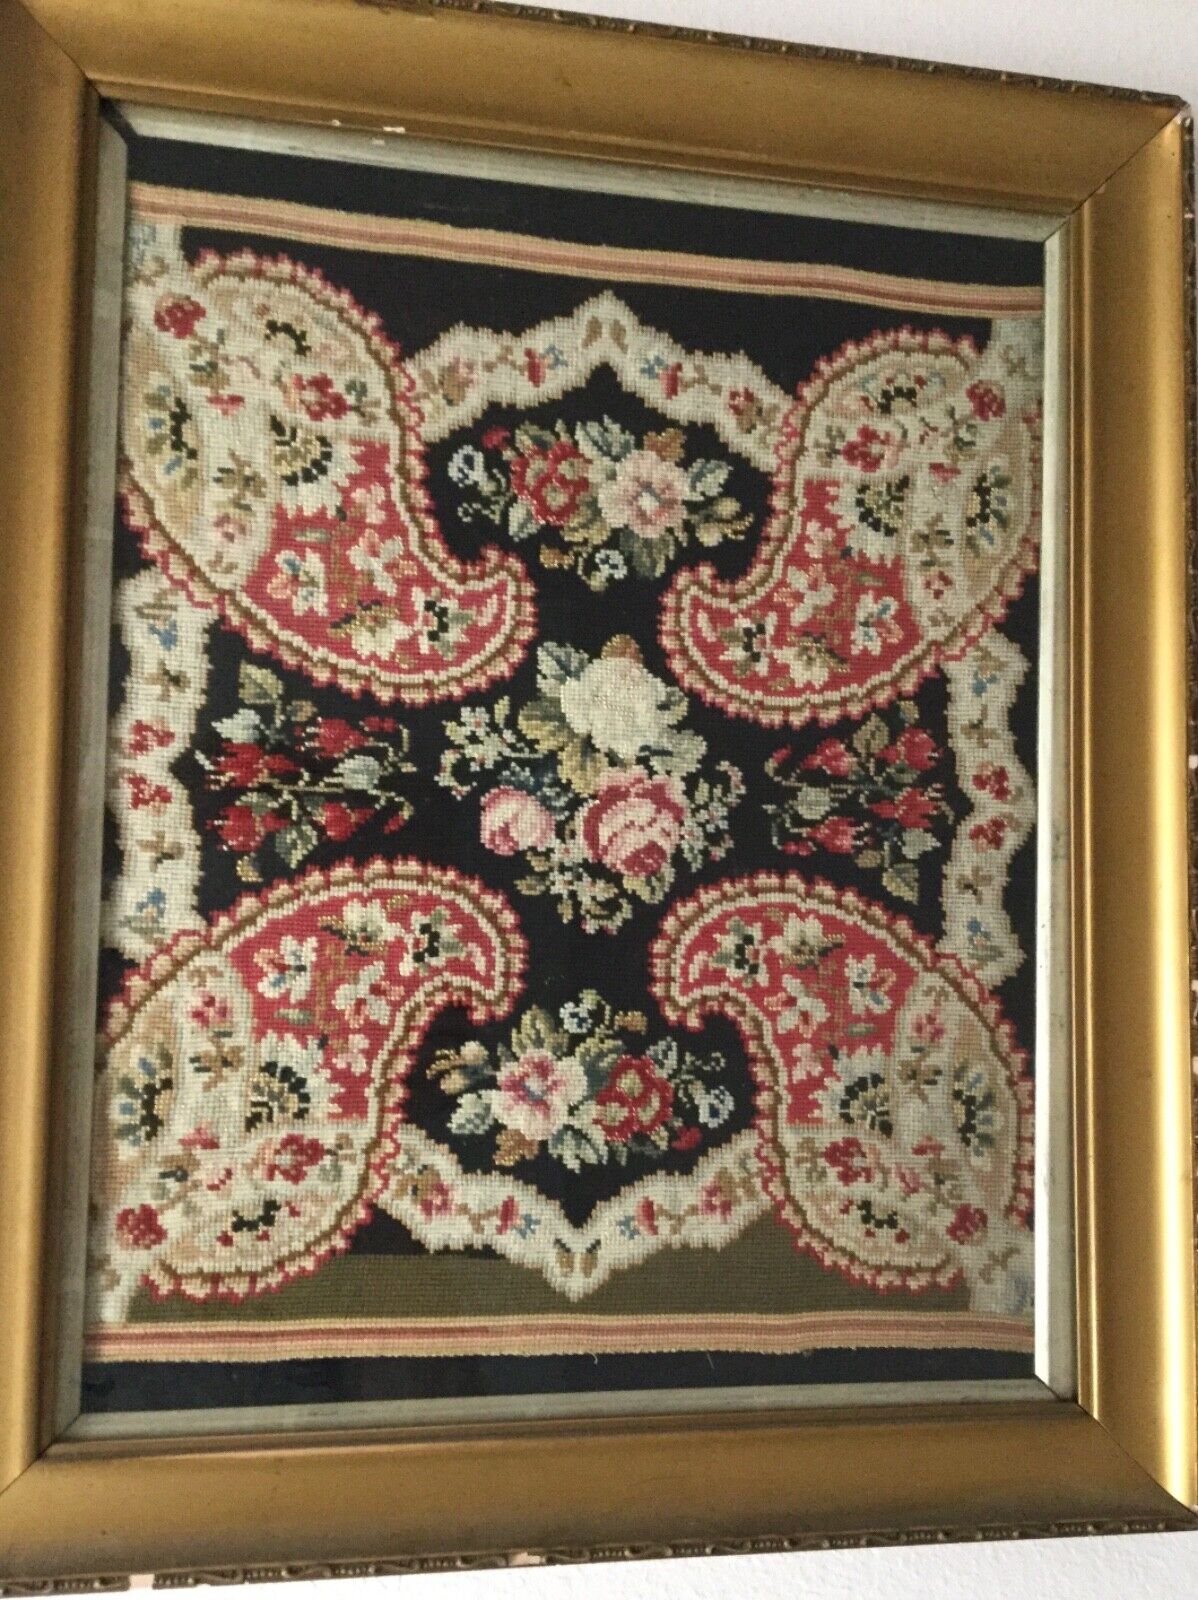 Antique 1820’s German Paisley Needlework  Framed Behind Glass 23” x 19” Overall